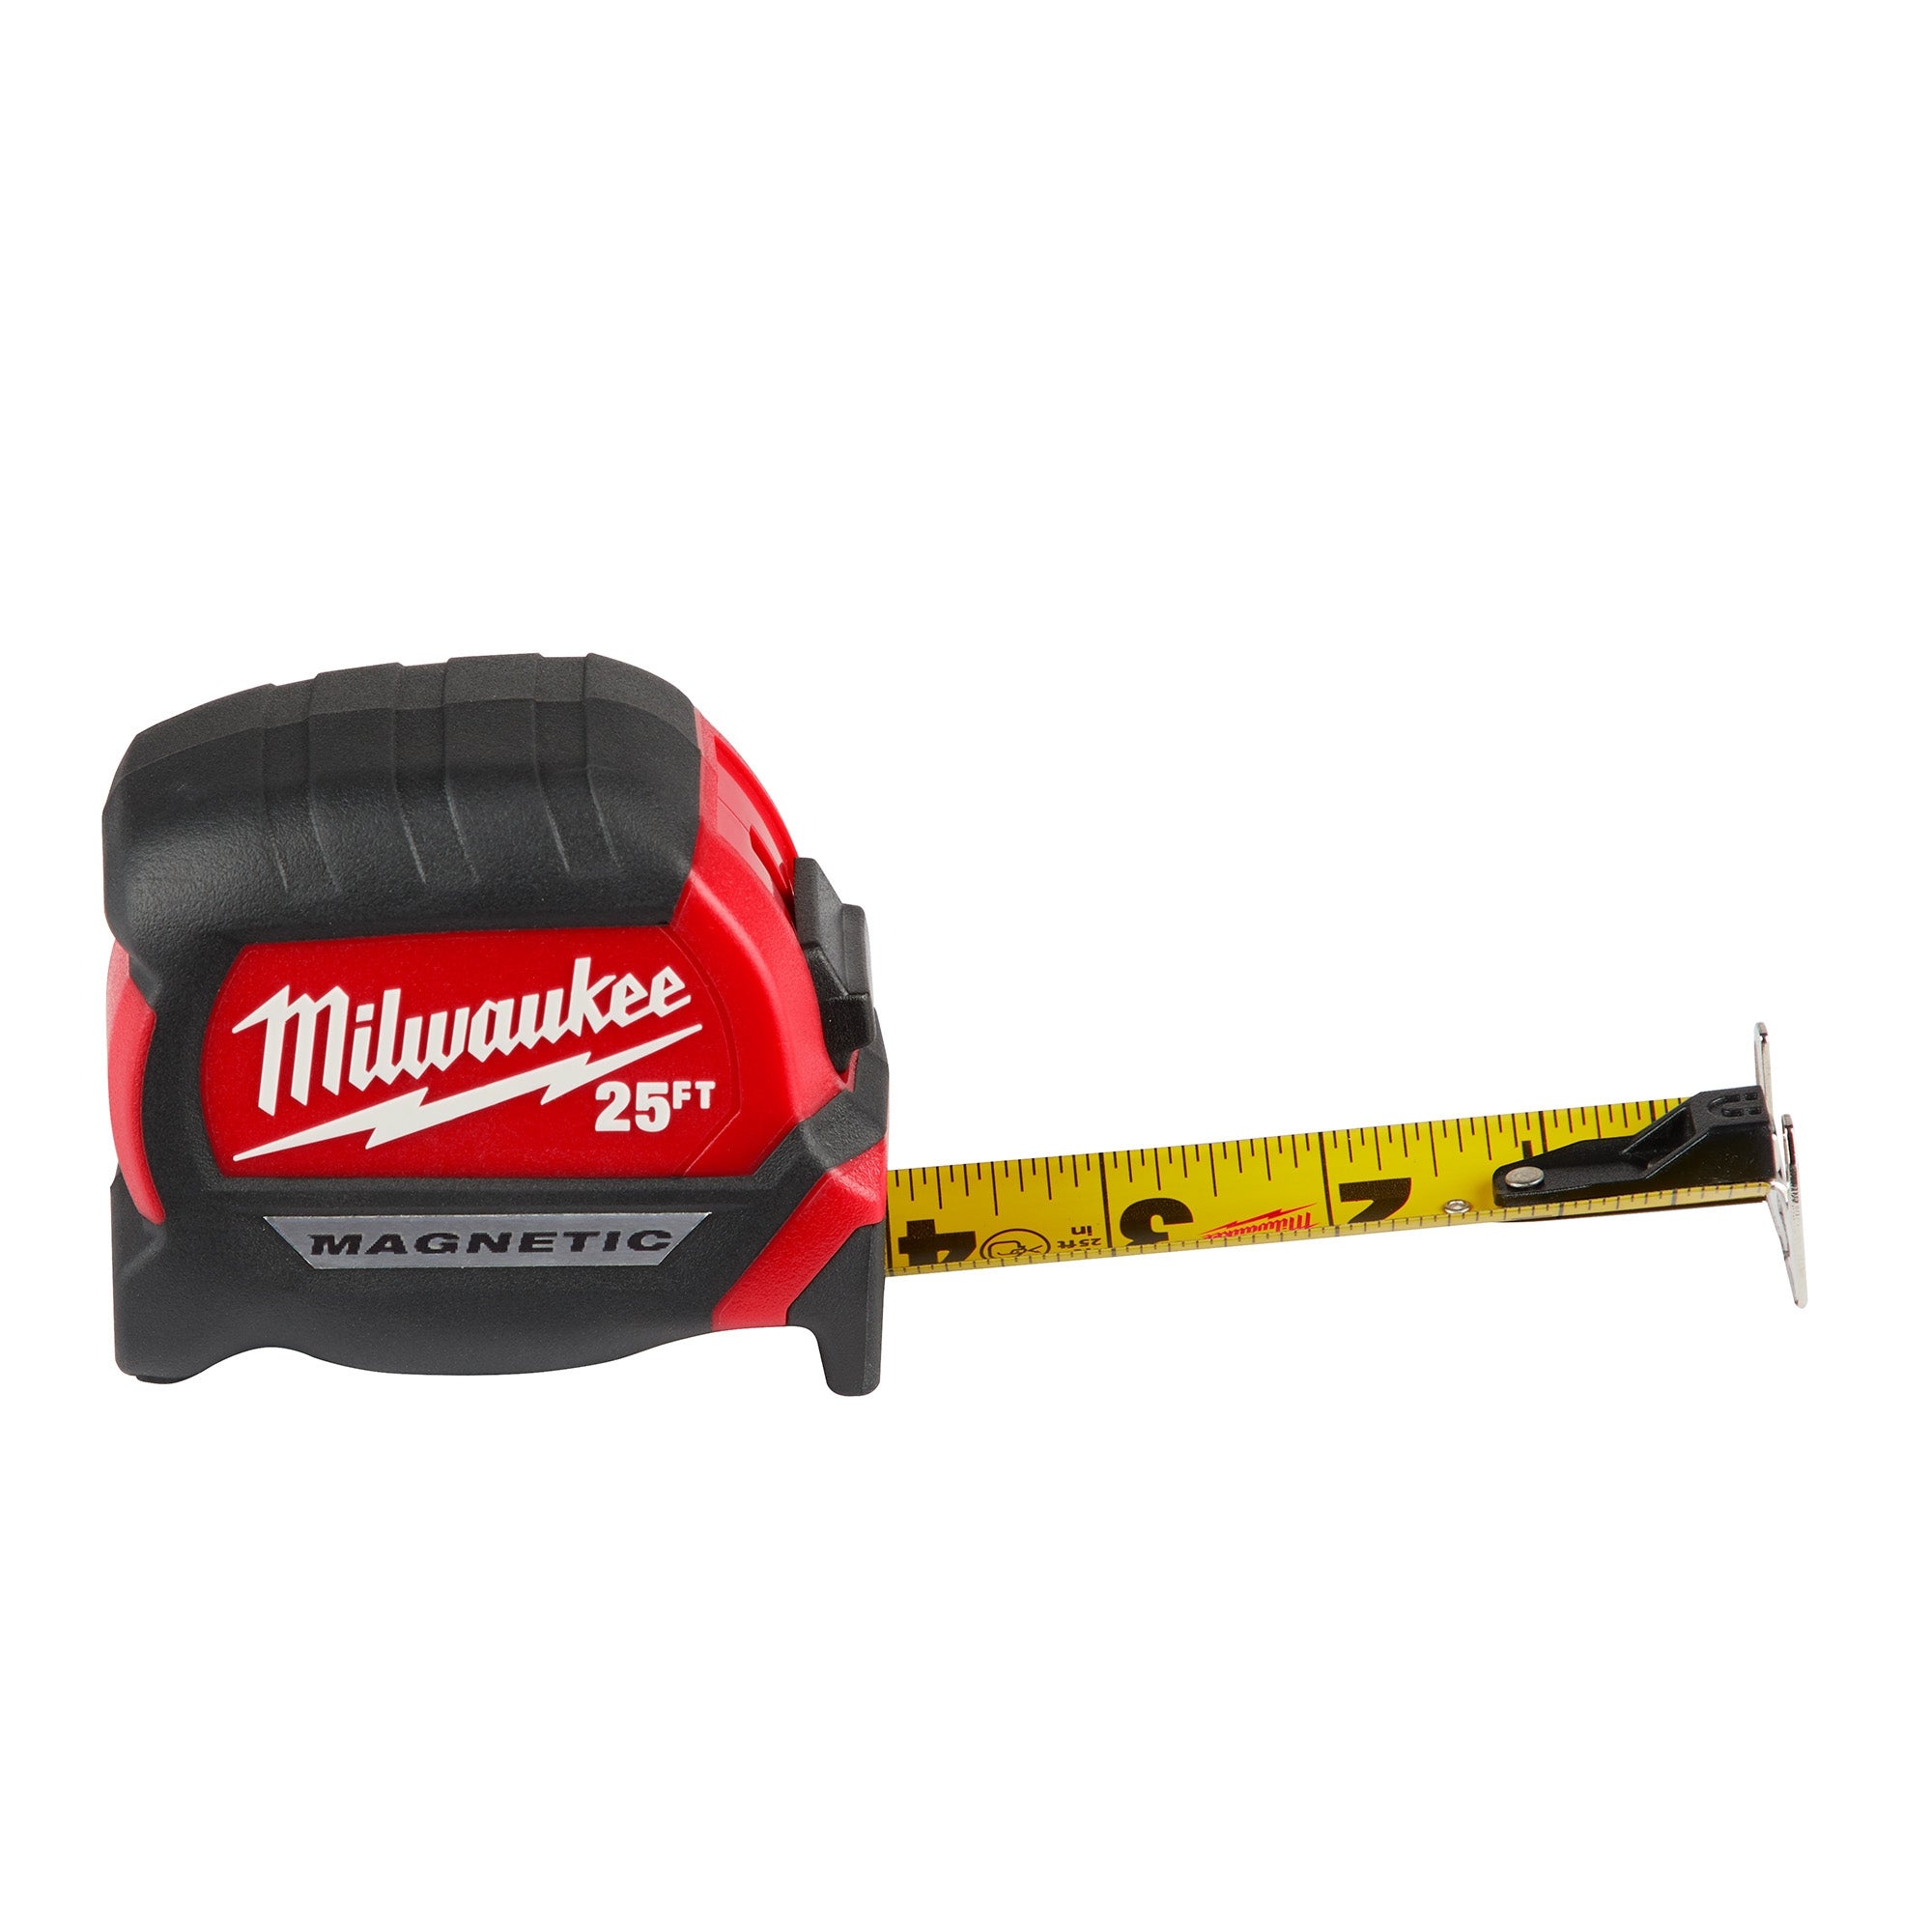 Milwaukee 48-22-0325G 25' Compact Wide Blade Magnetic Tape Measure 2-Pack